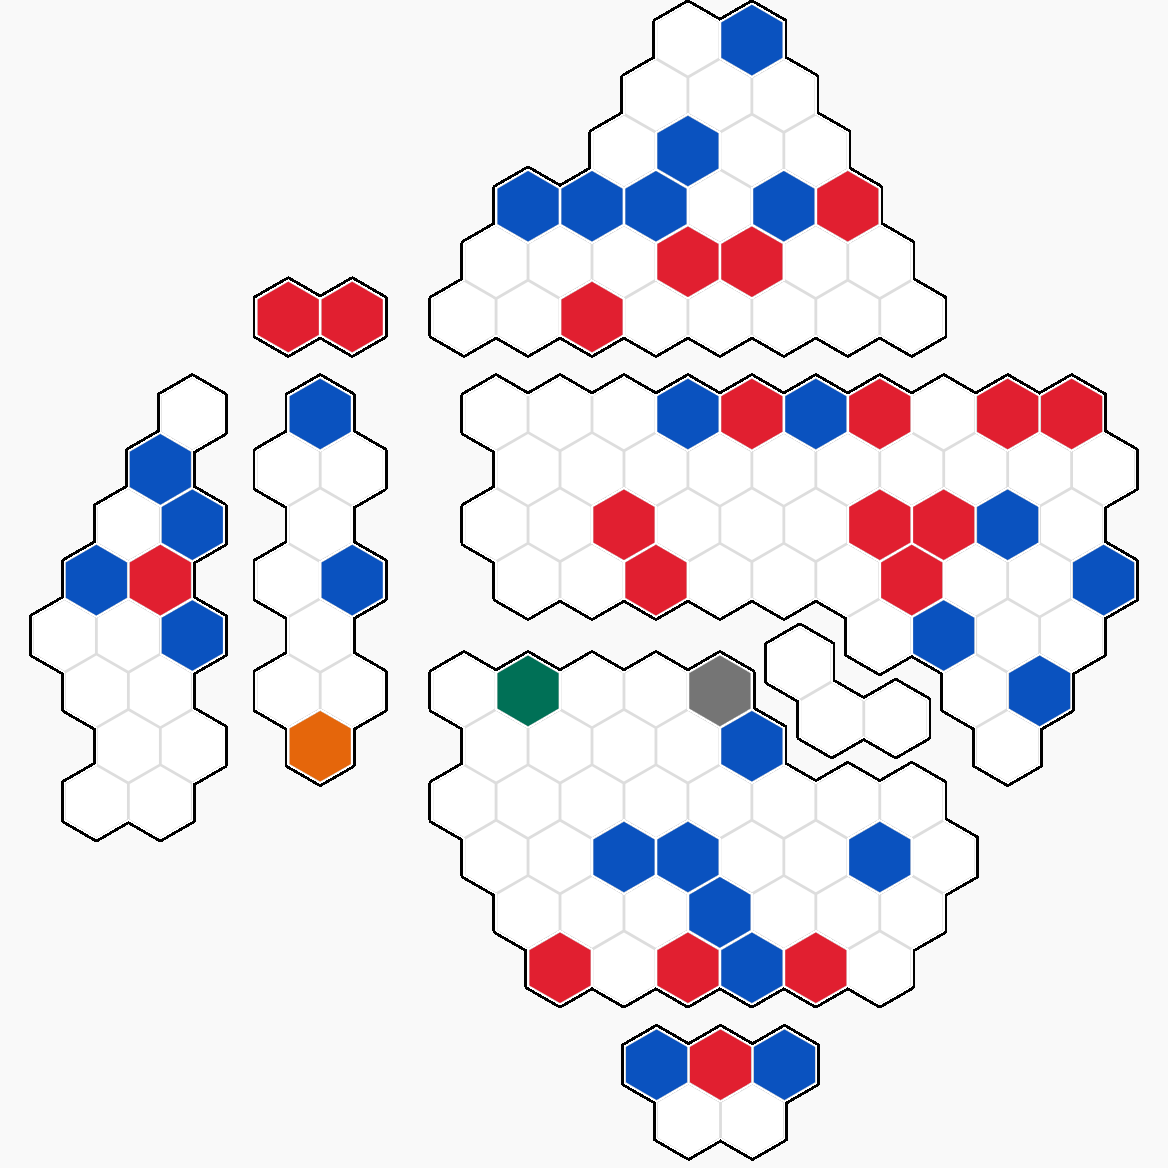 A white map of Australia divided up into hexagonal shapes, with some of the shaped coloured in red, blue or grey.